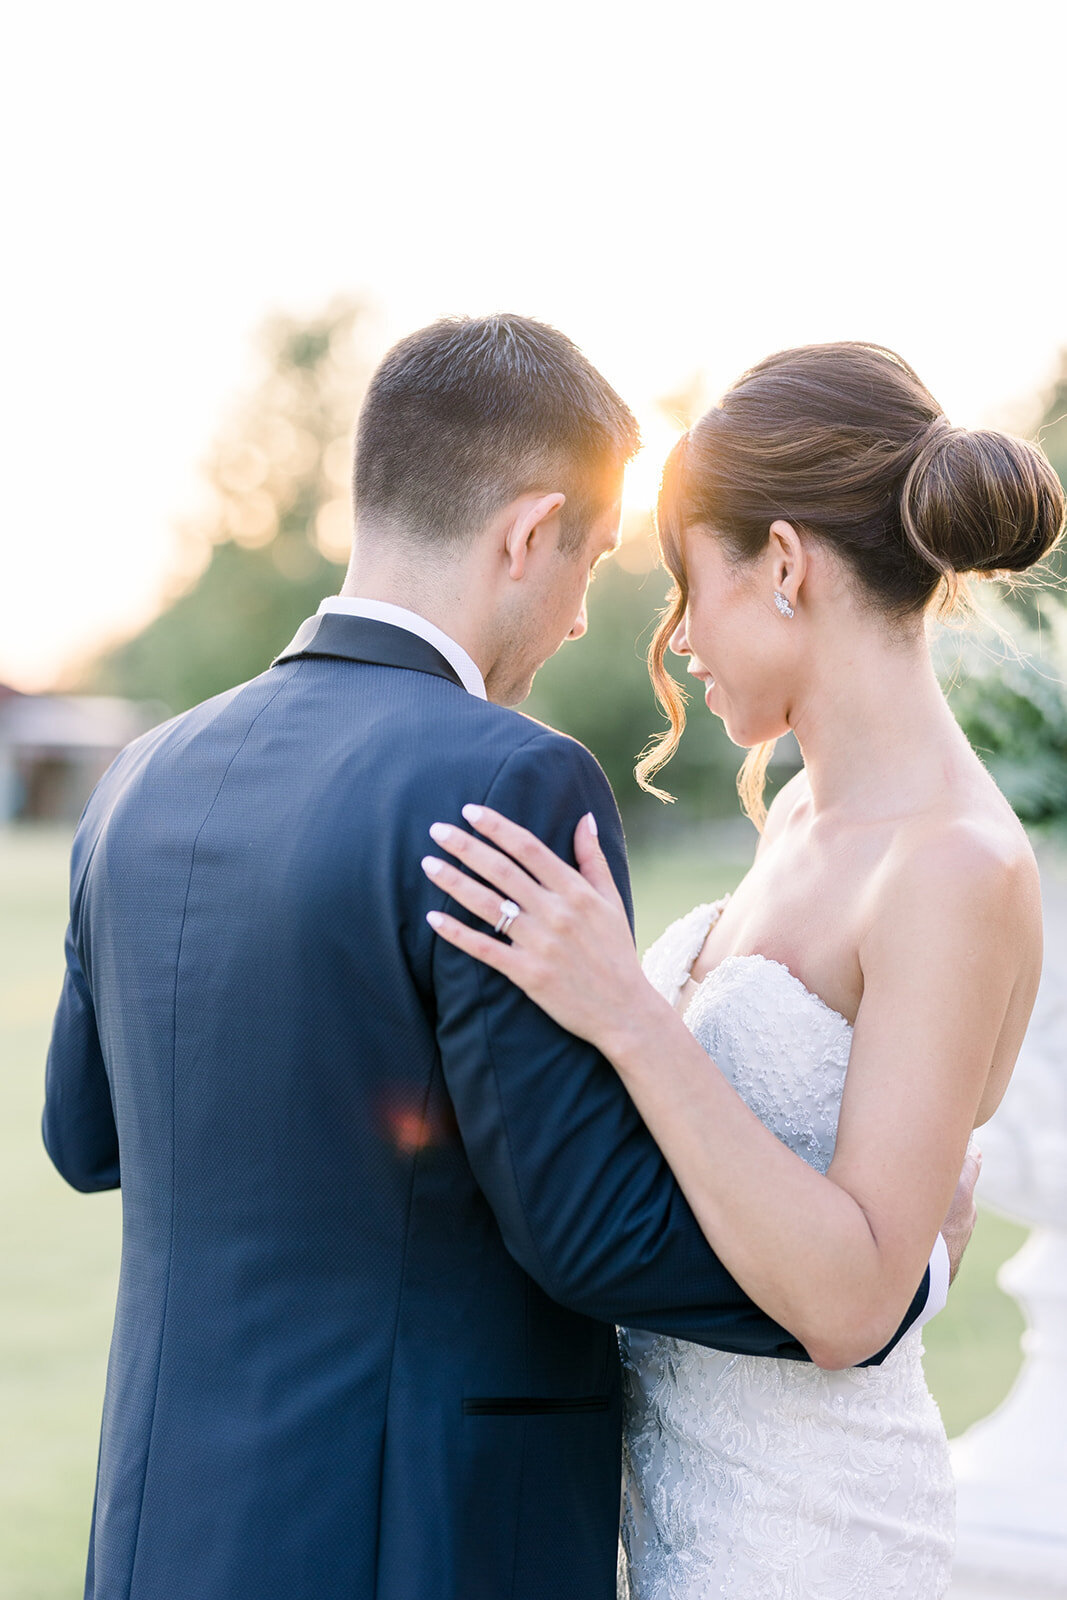 NEwlyweds watch the sunset while hugging on a patio